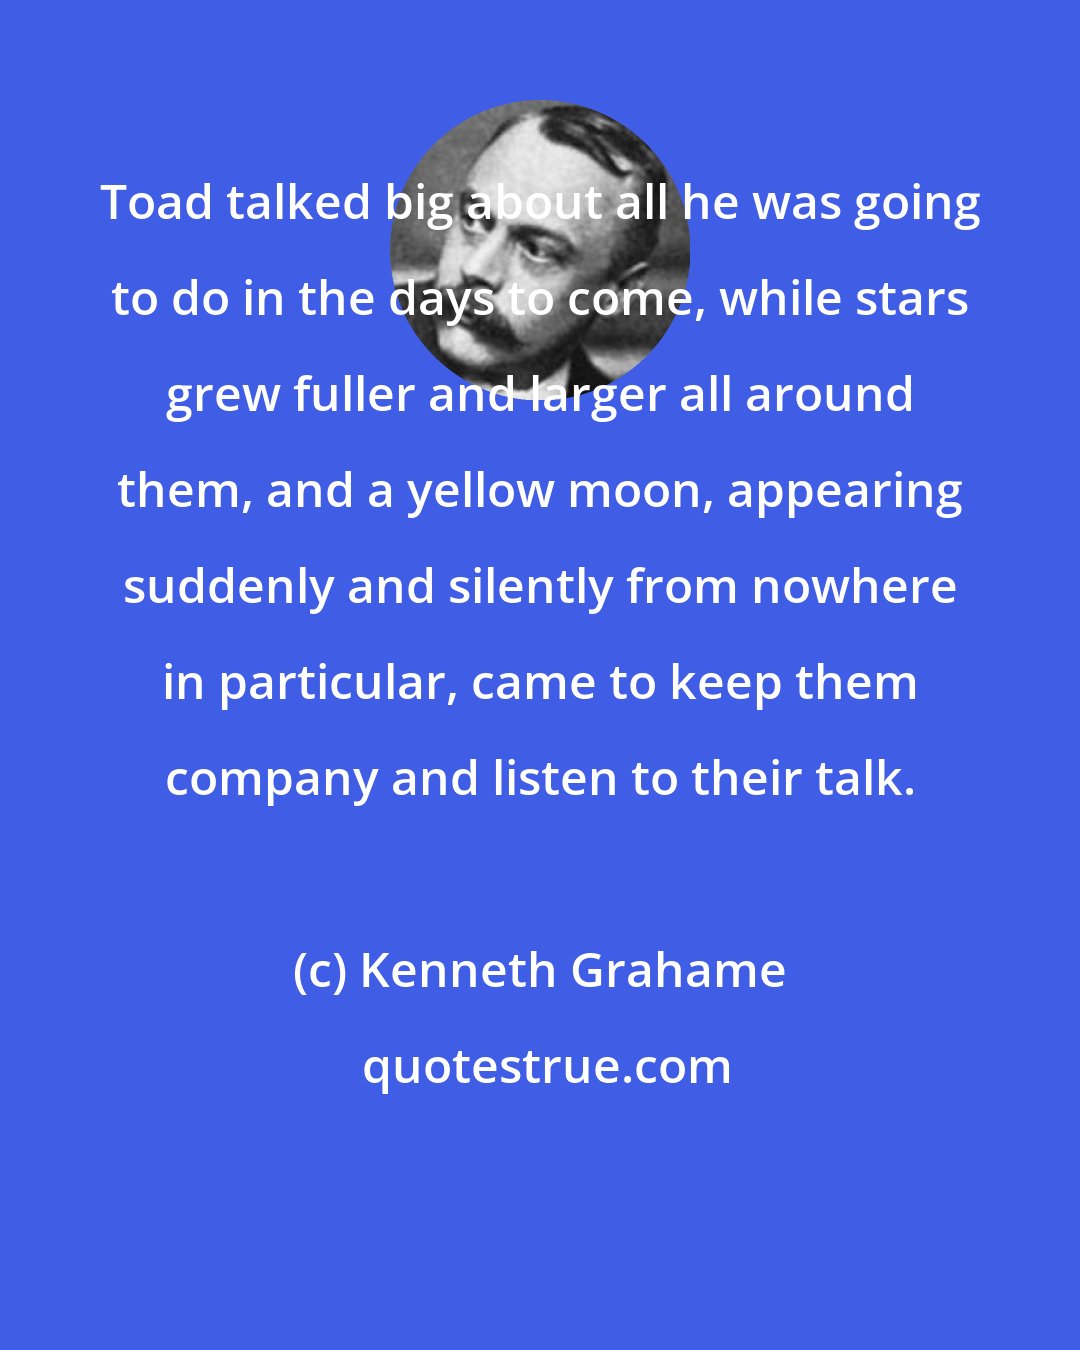 Kenneth Grahame: Toad talked big about all he was going to do in the days to come, while stars grew fuller and larger all around them, and a yellow moon, appearing suddenly and silently from nowhere in particular, came to keep them company and listen to their talk.